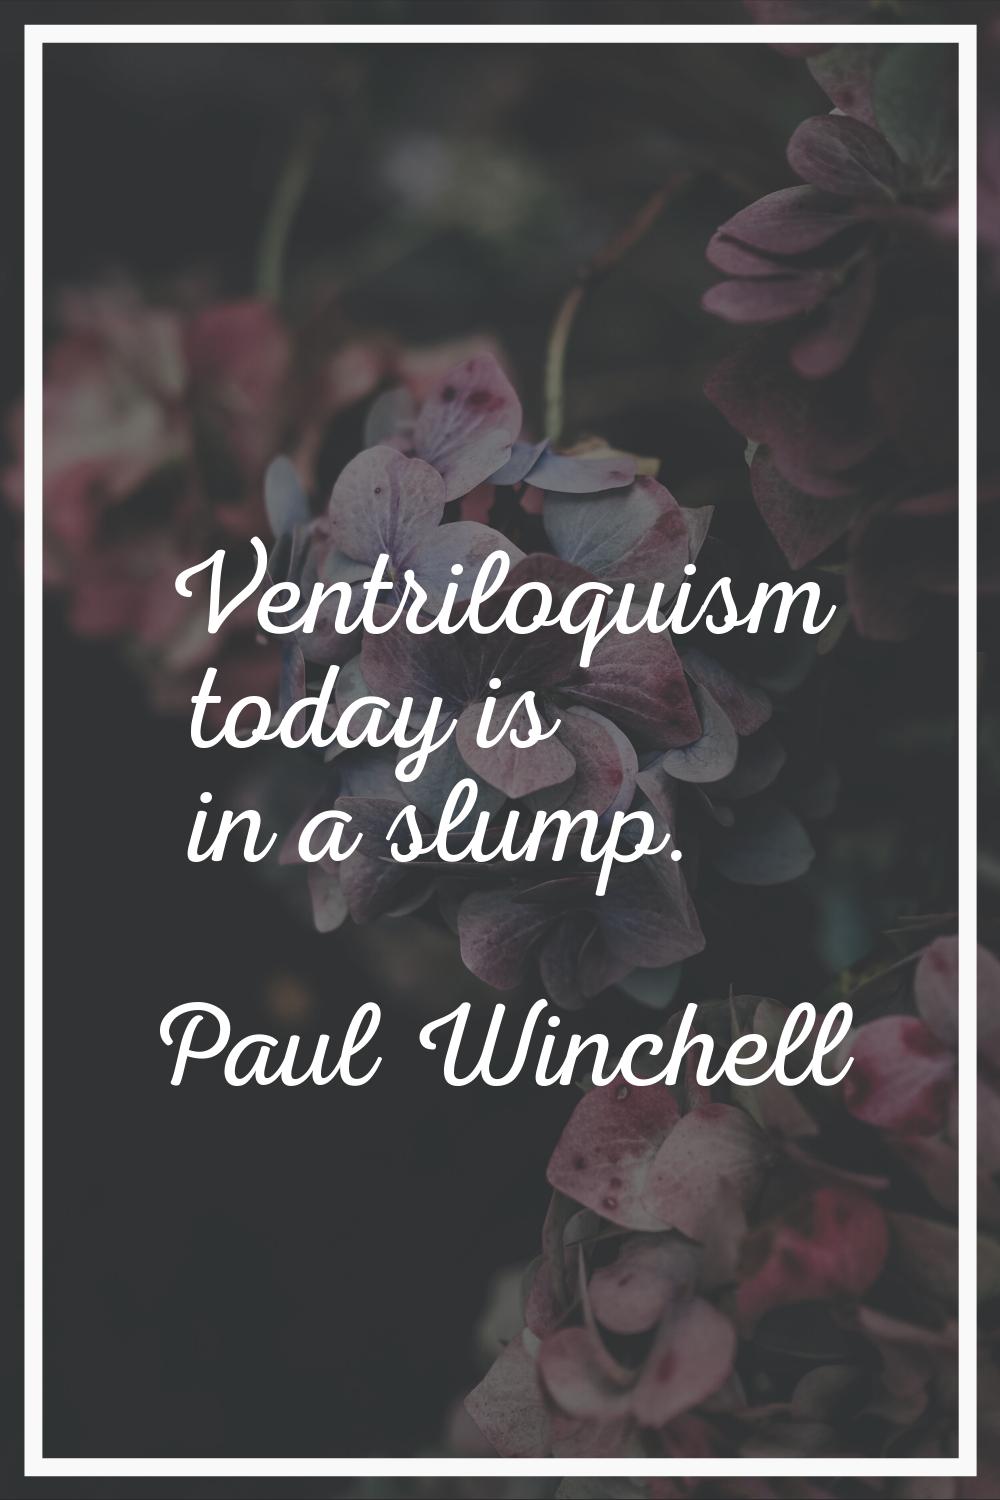 Ventriloquism today is in a slump.